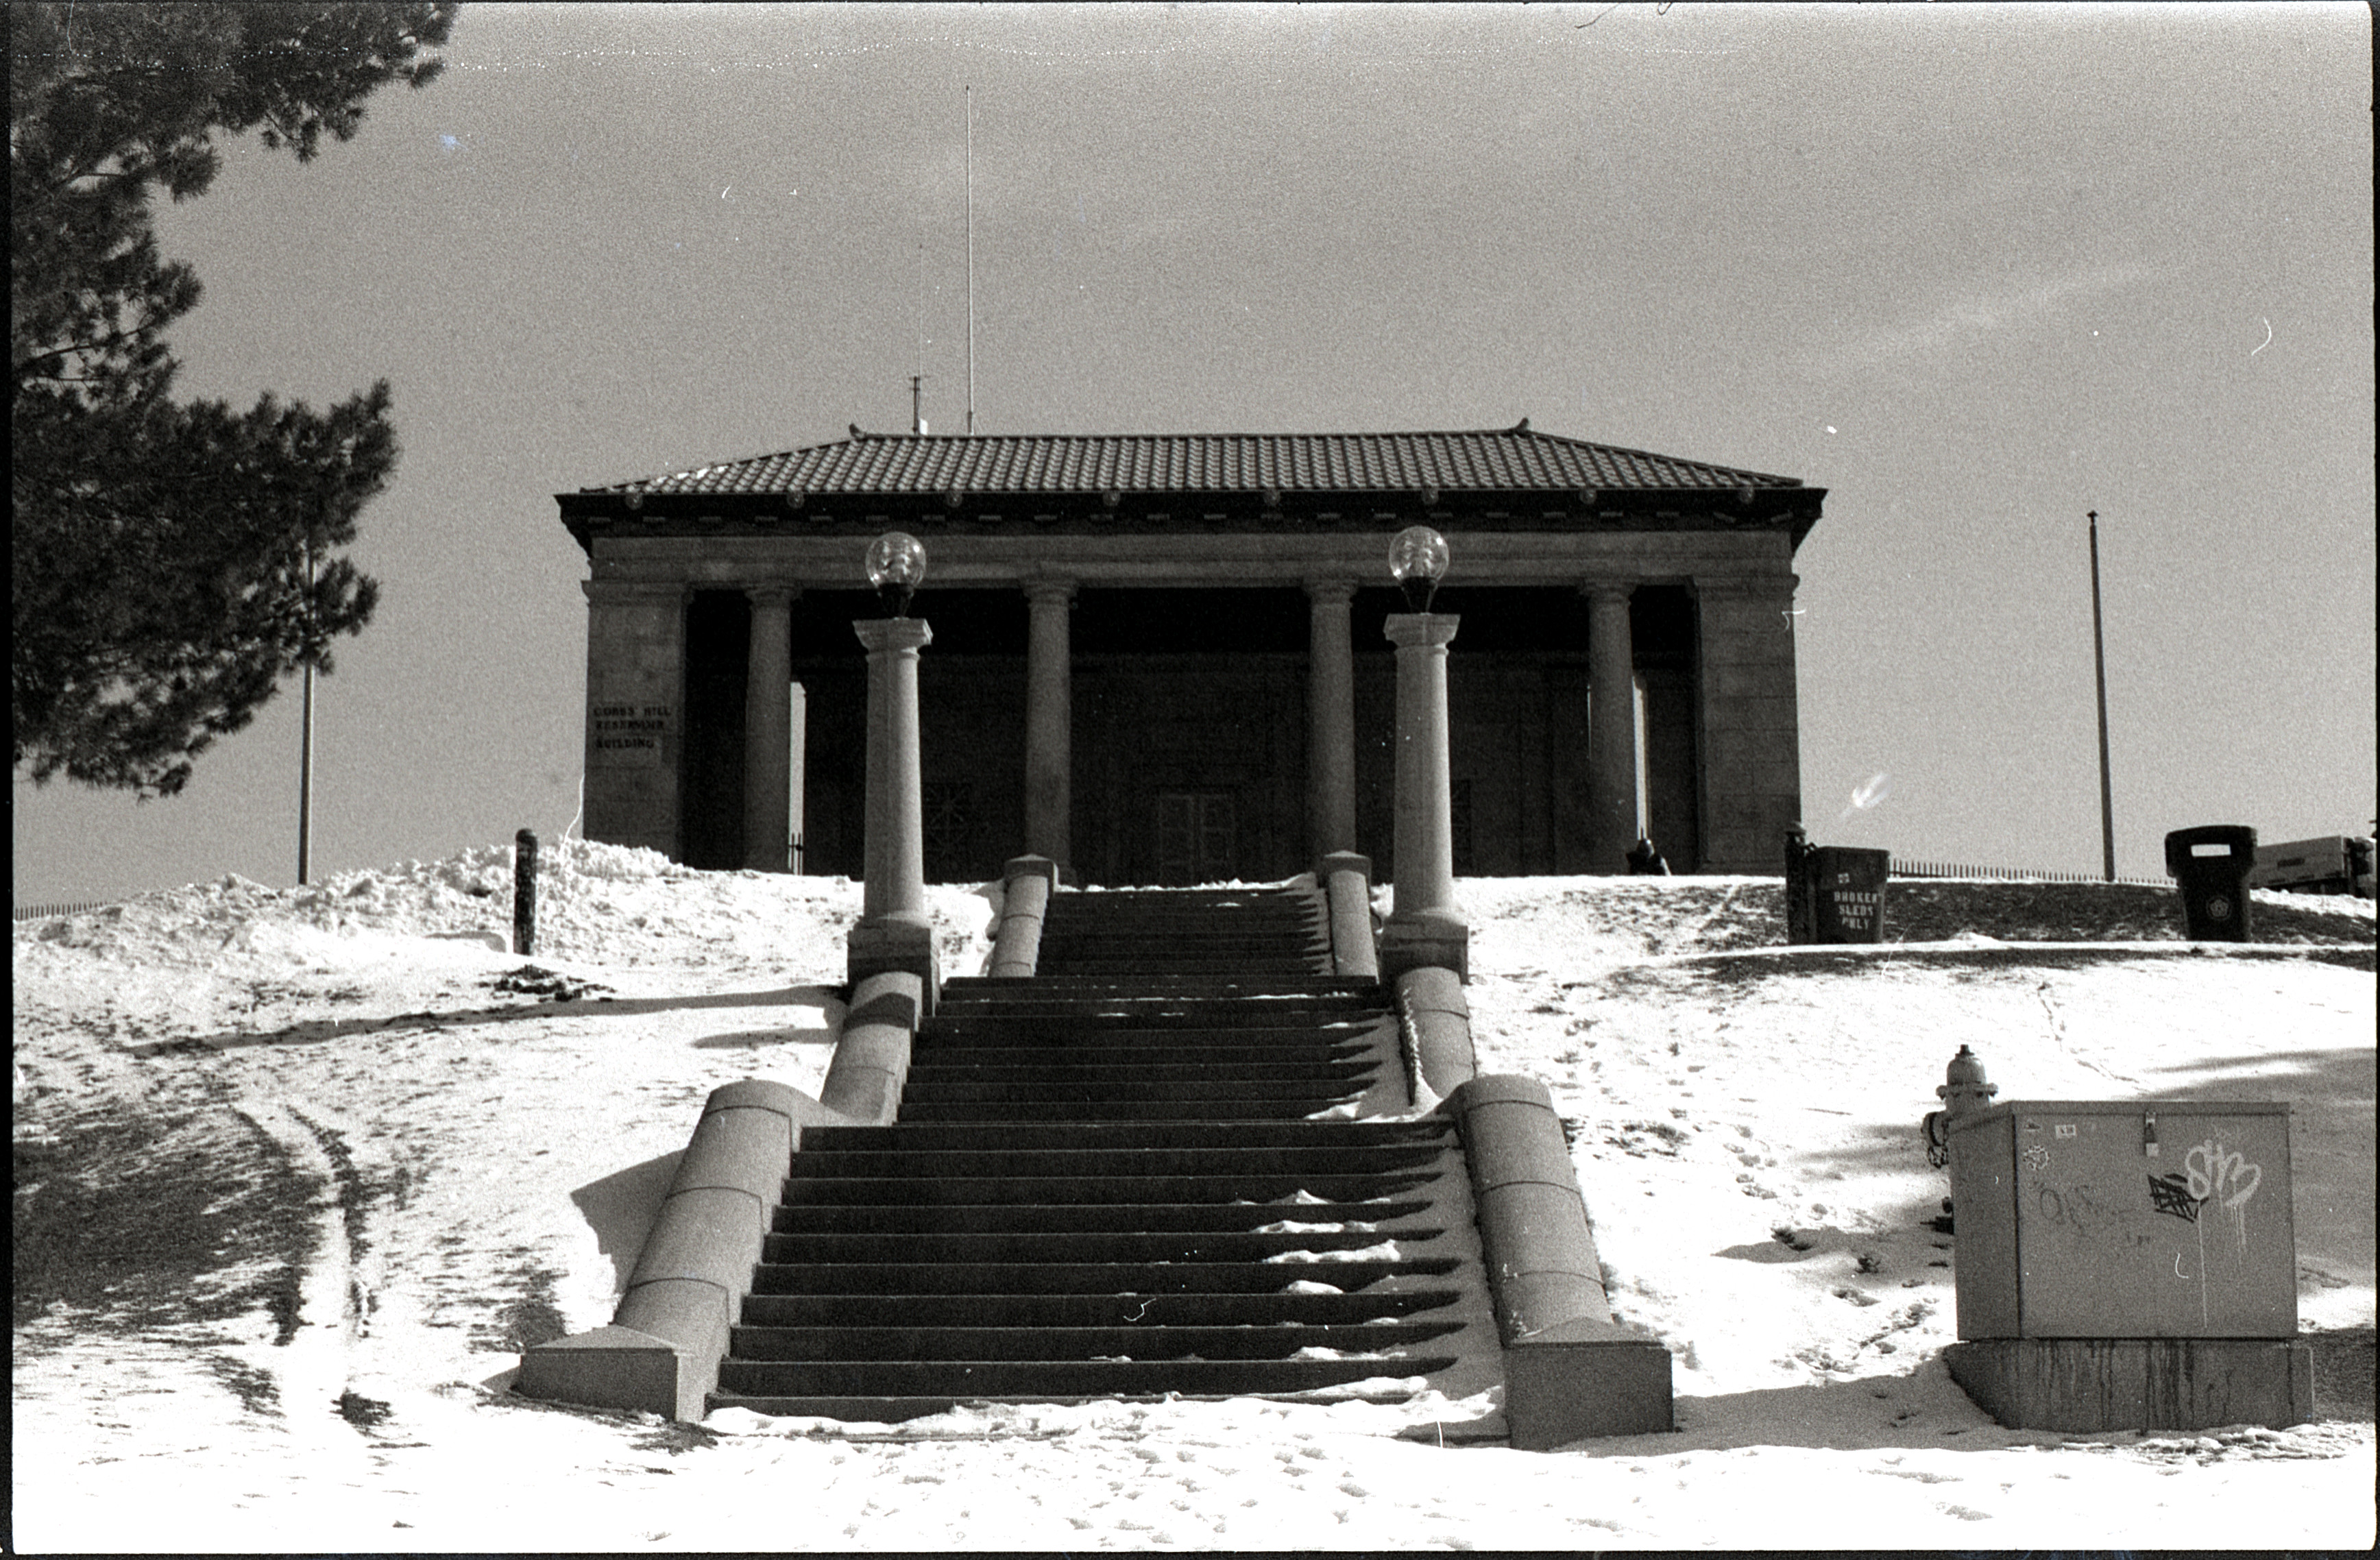 photo, black and white with some film artifacting: stairs leading up through snow towards a building with imposing columns